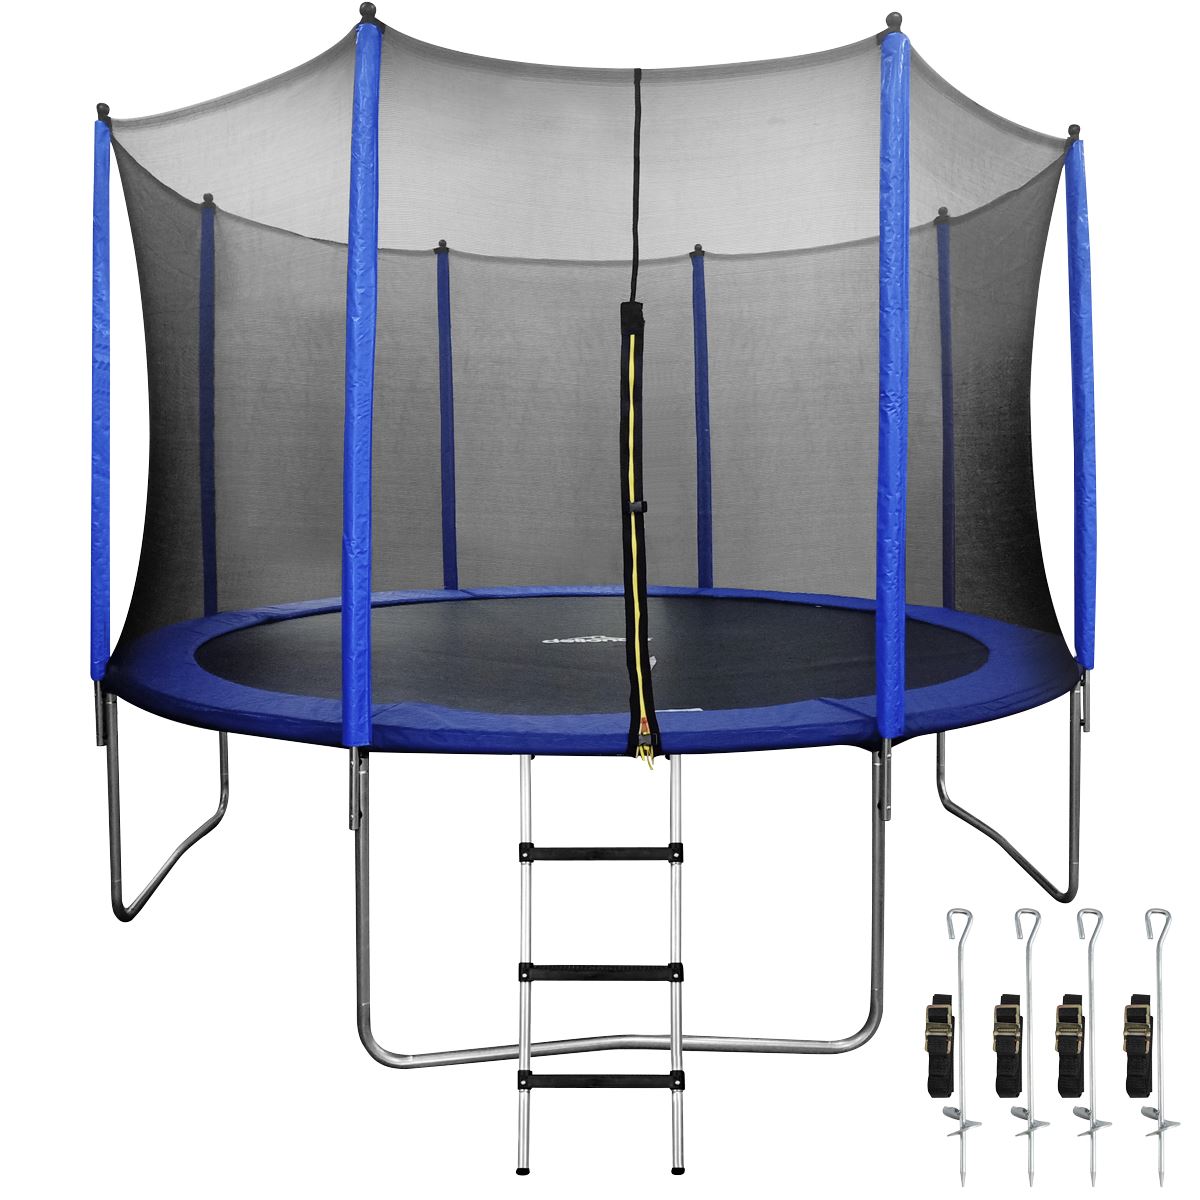 Dellonda 12ft Heavy-Duty Outdoor Trampoline for Kids with Safety Enclosure Net, Includes Anchor Kit and Ladder